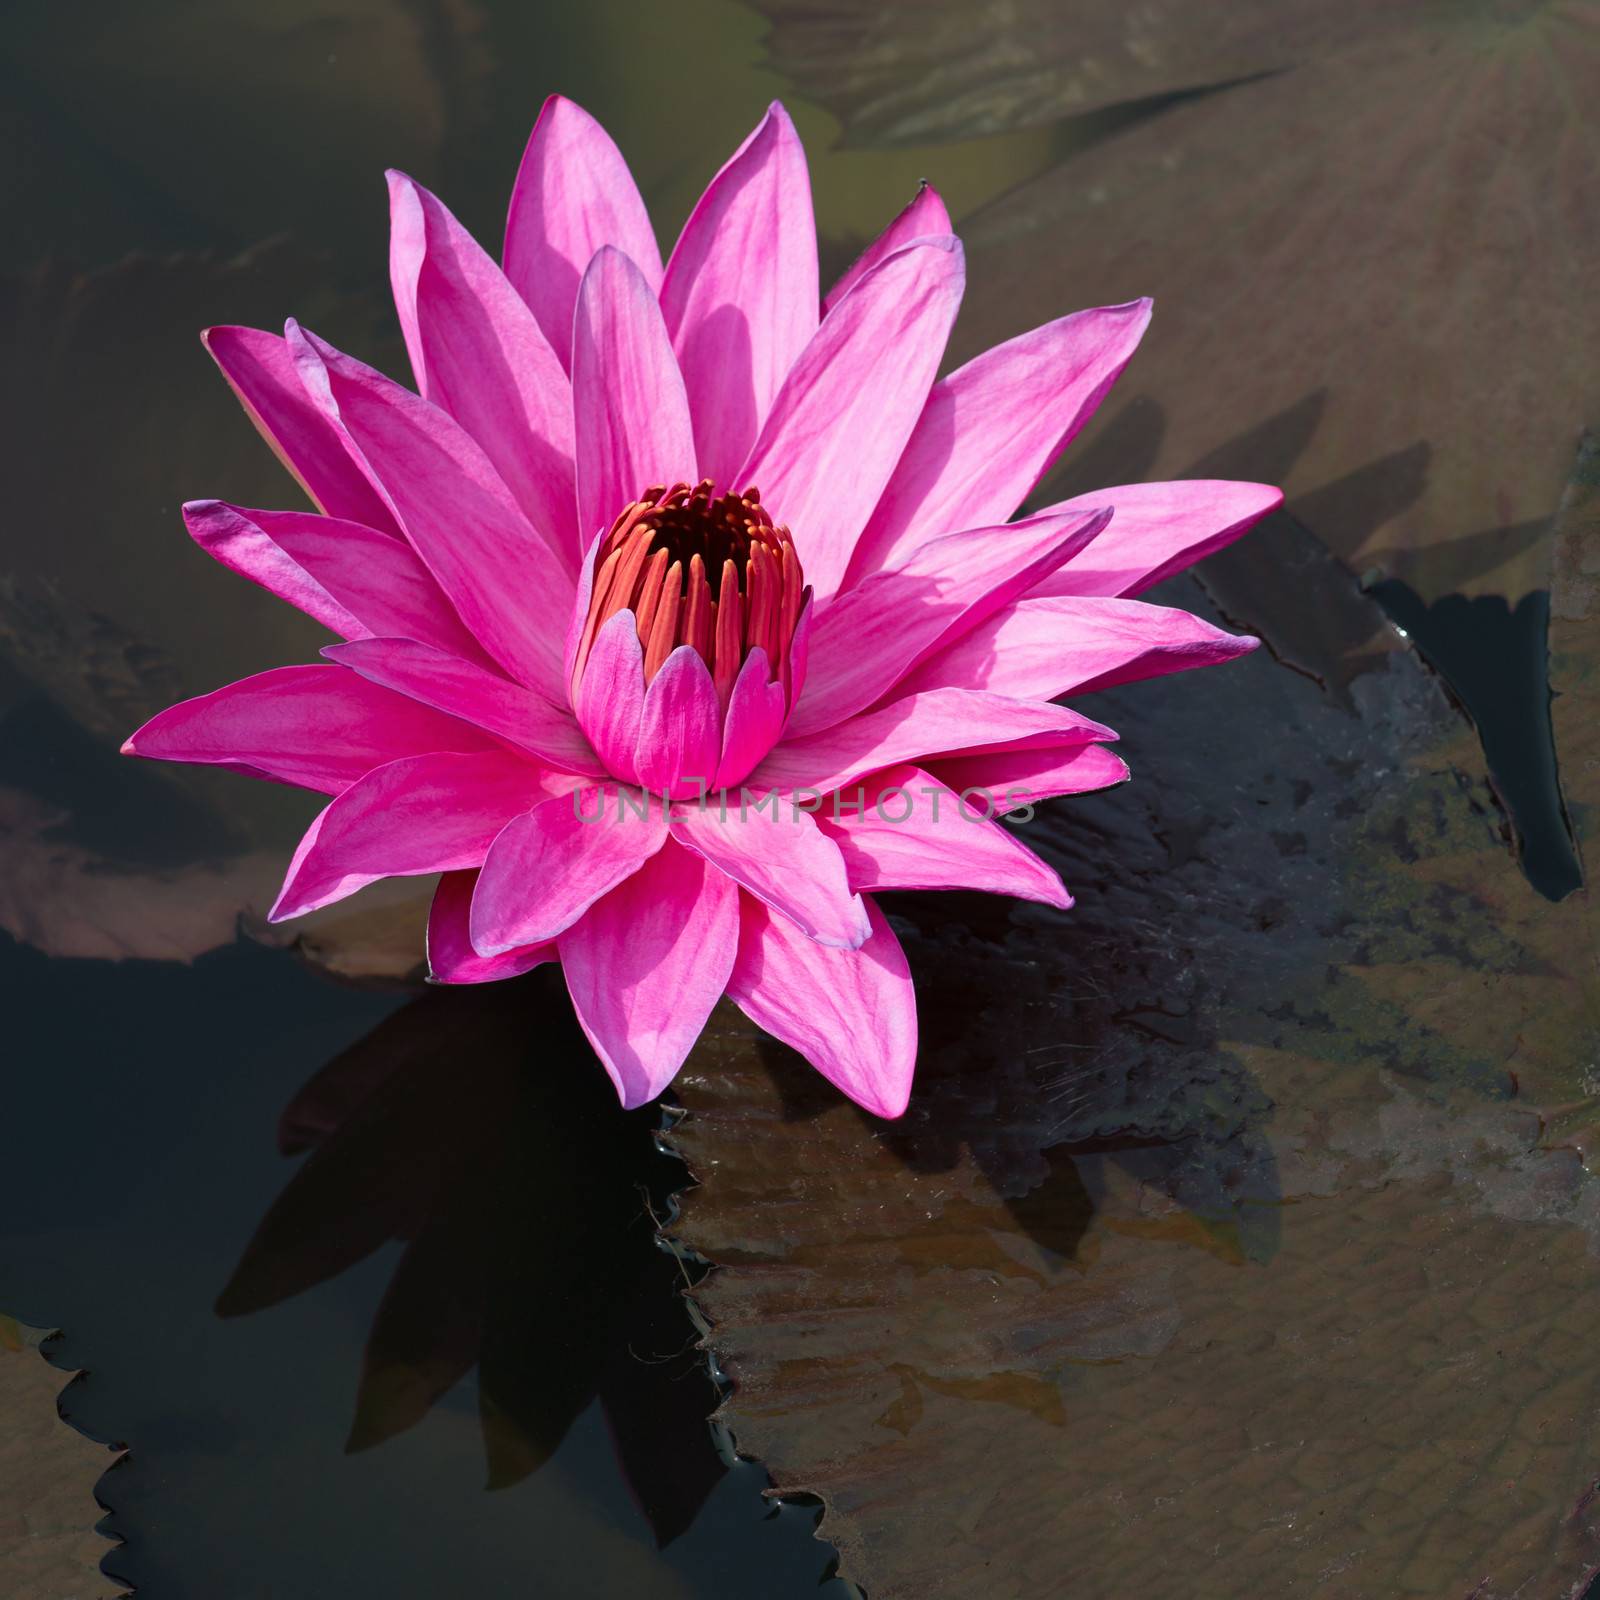 Flower fuchsia-colored Nymphaea nouchali star lotus or water lily in water pond